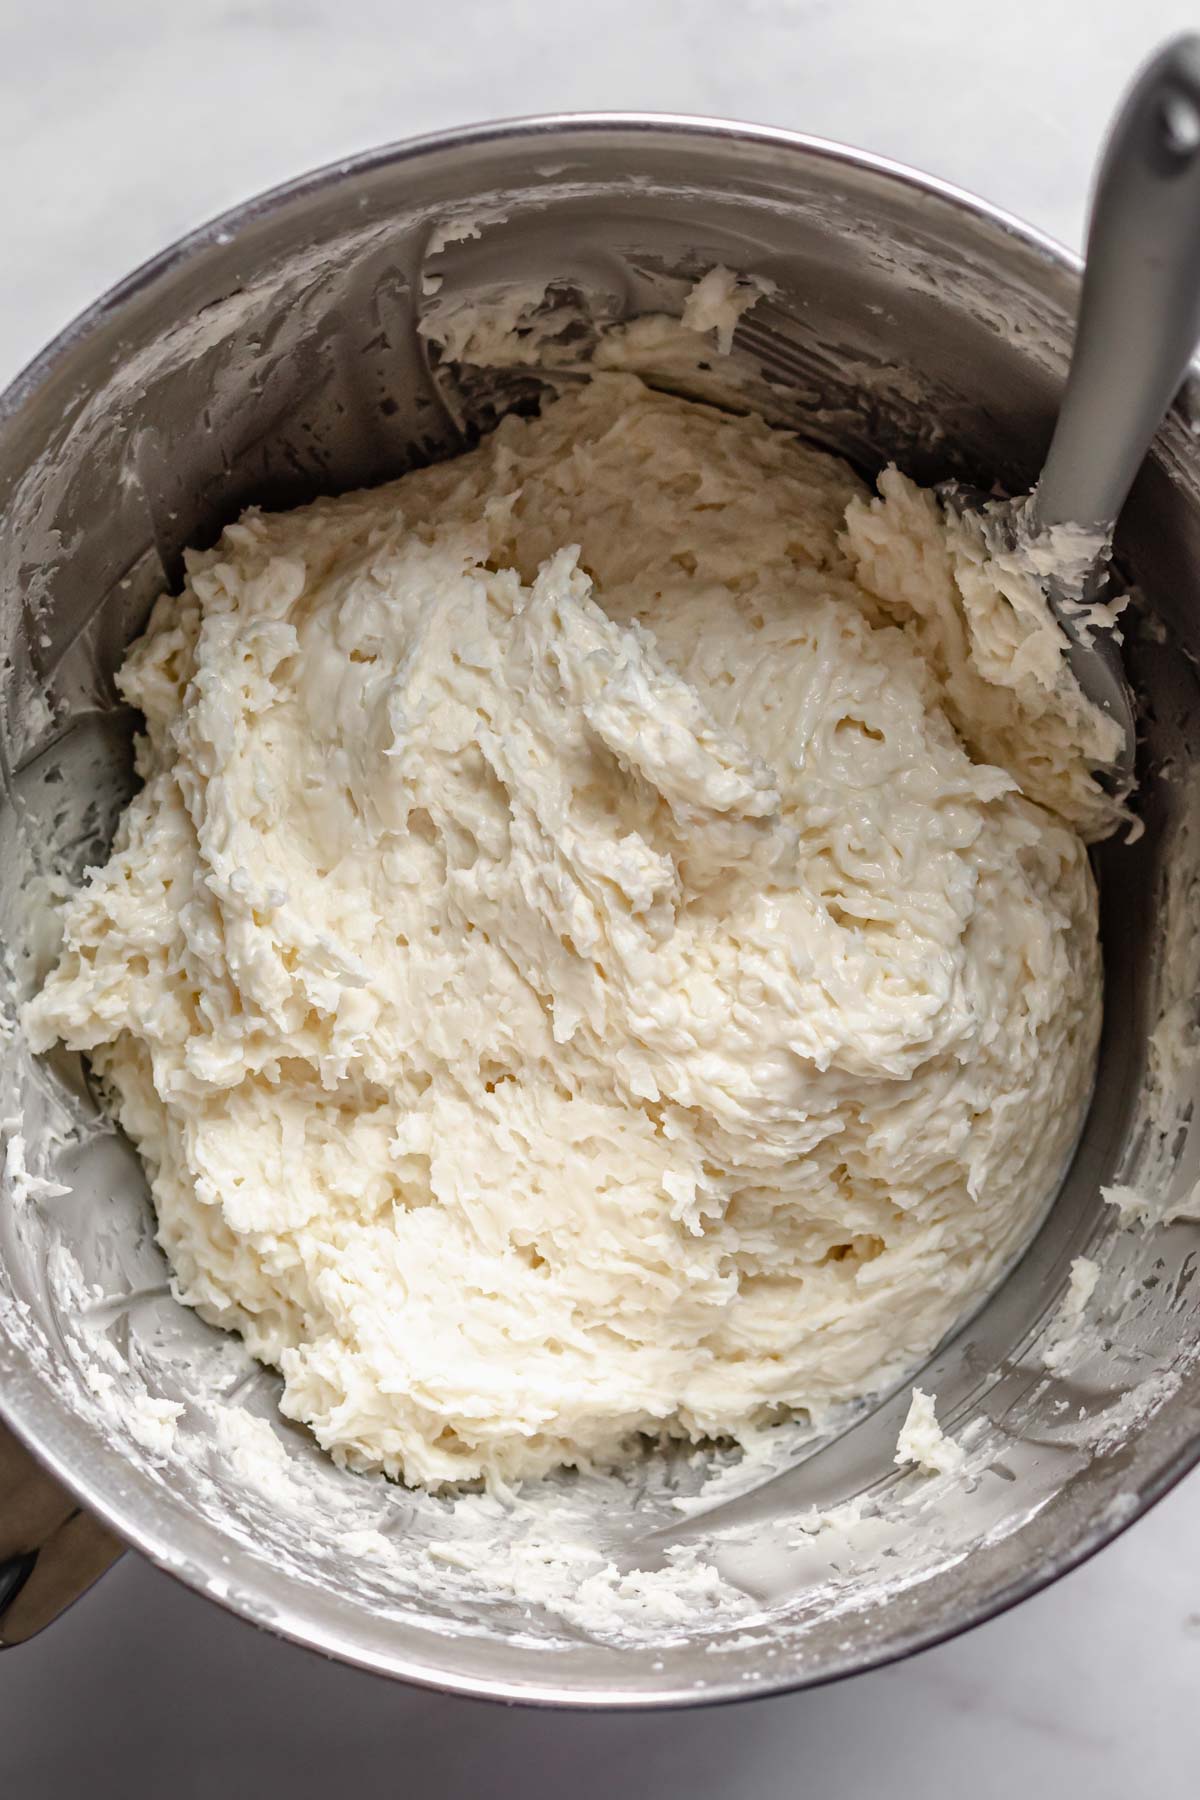 Finished batter in a mixing bowl.